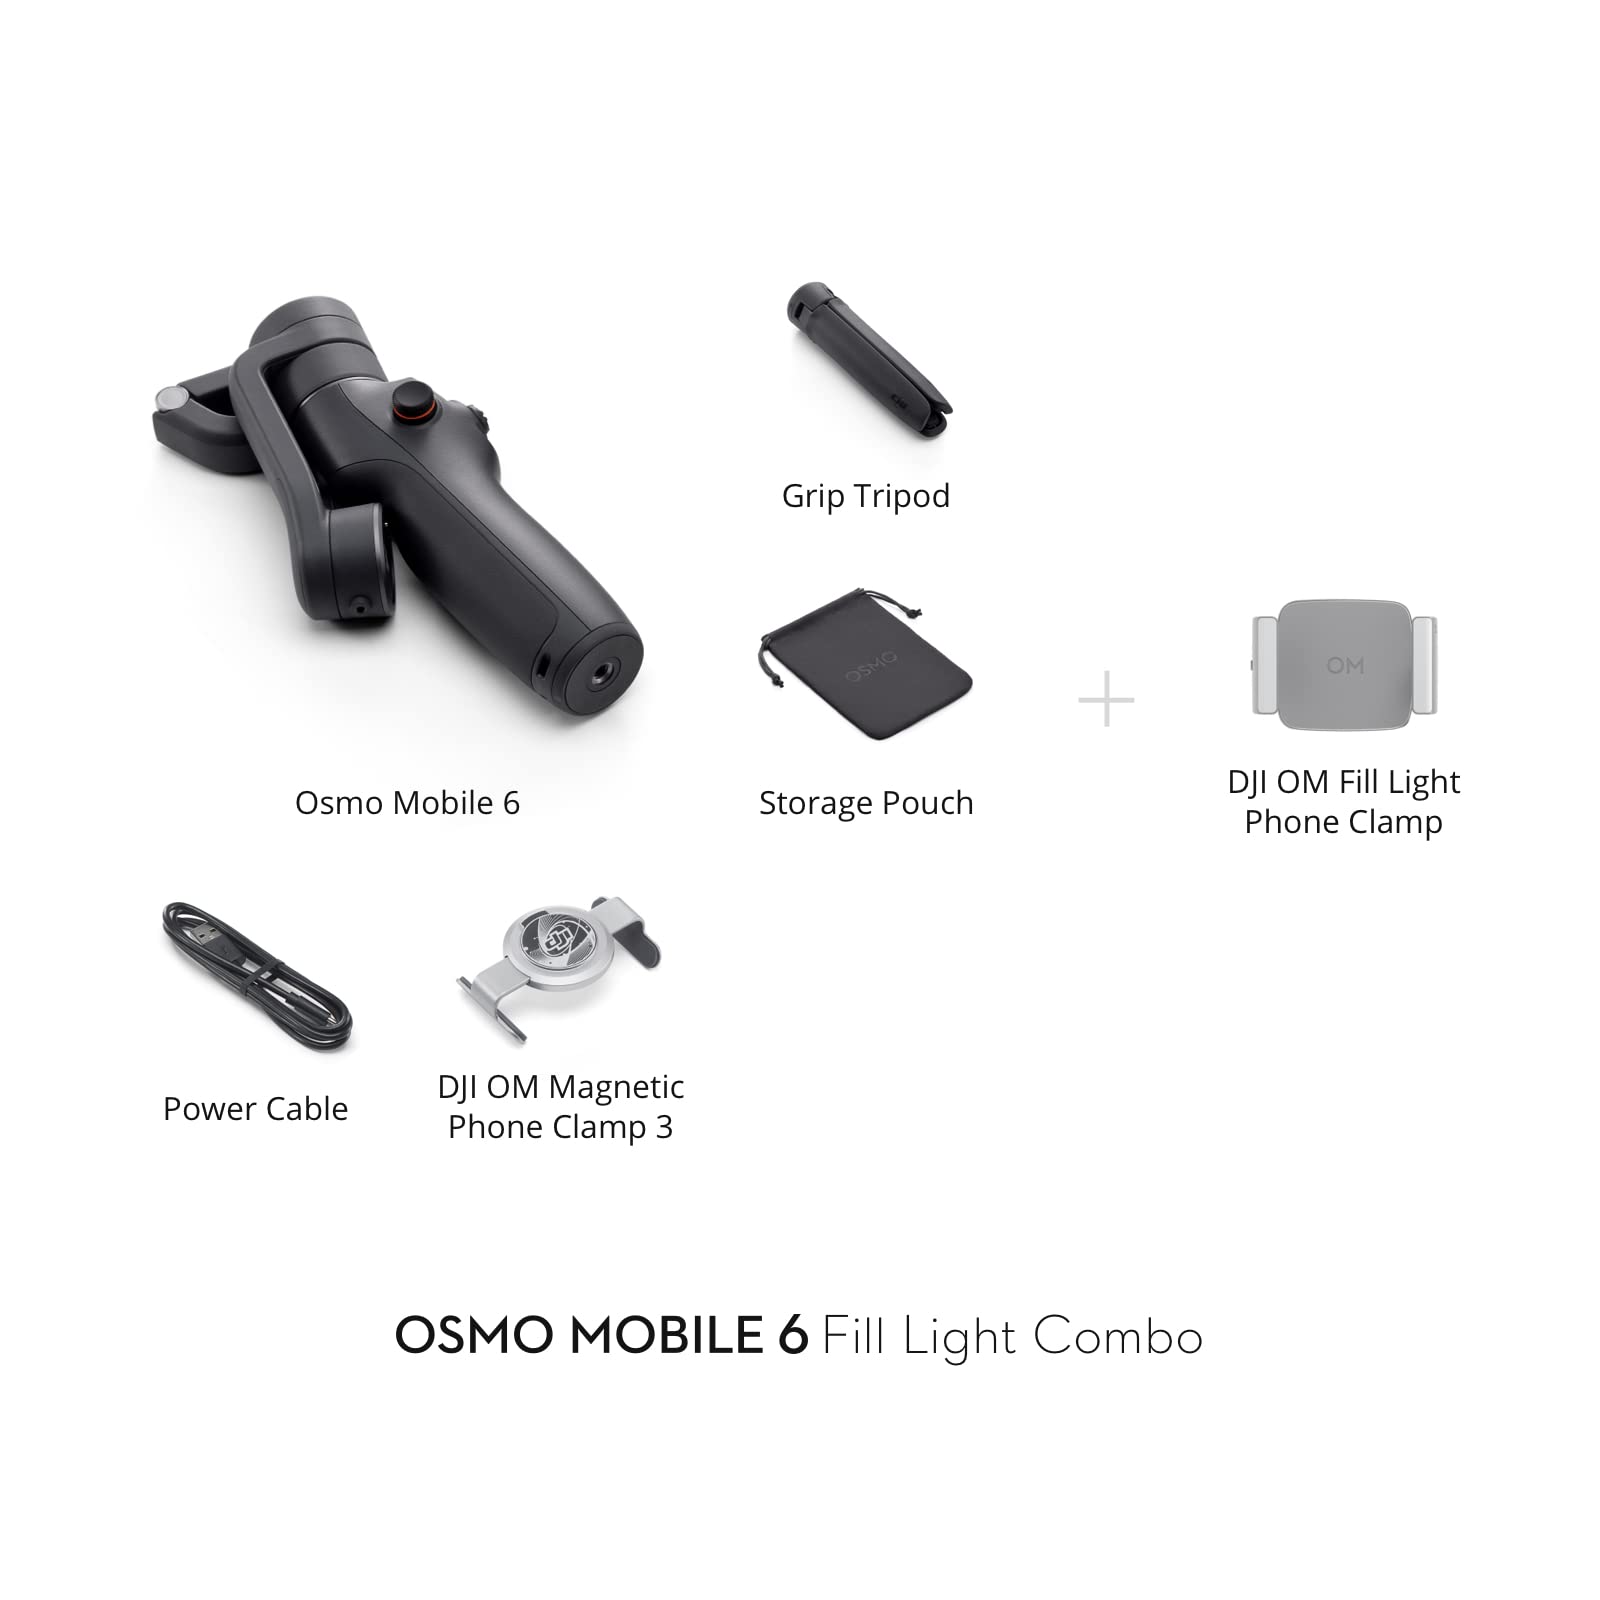 DJI Osmo Mobile 6 Fill Light Combo, 3-Axis Phone Gimbal, Built-In Extension Rod, Portable and Foldable, Android and iPhone Gimbal, Object Tracking, Slate Gray, with a Fill Light Phone Clamp